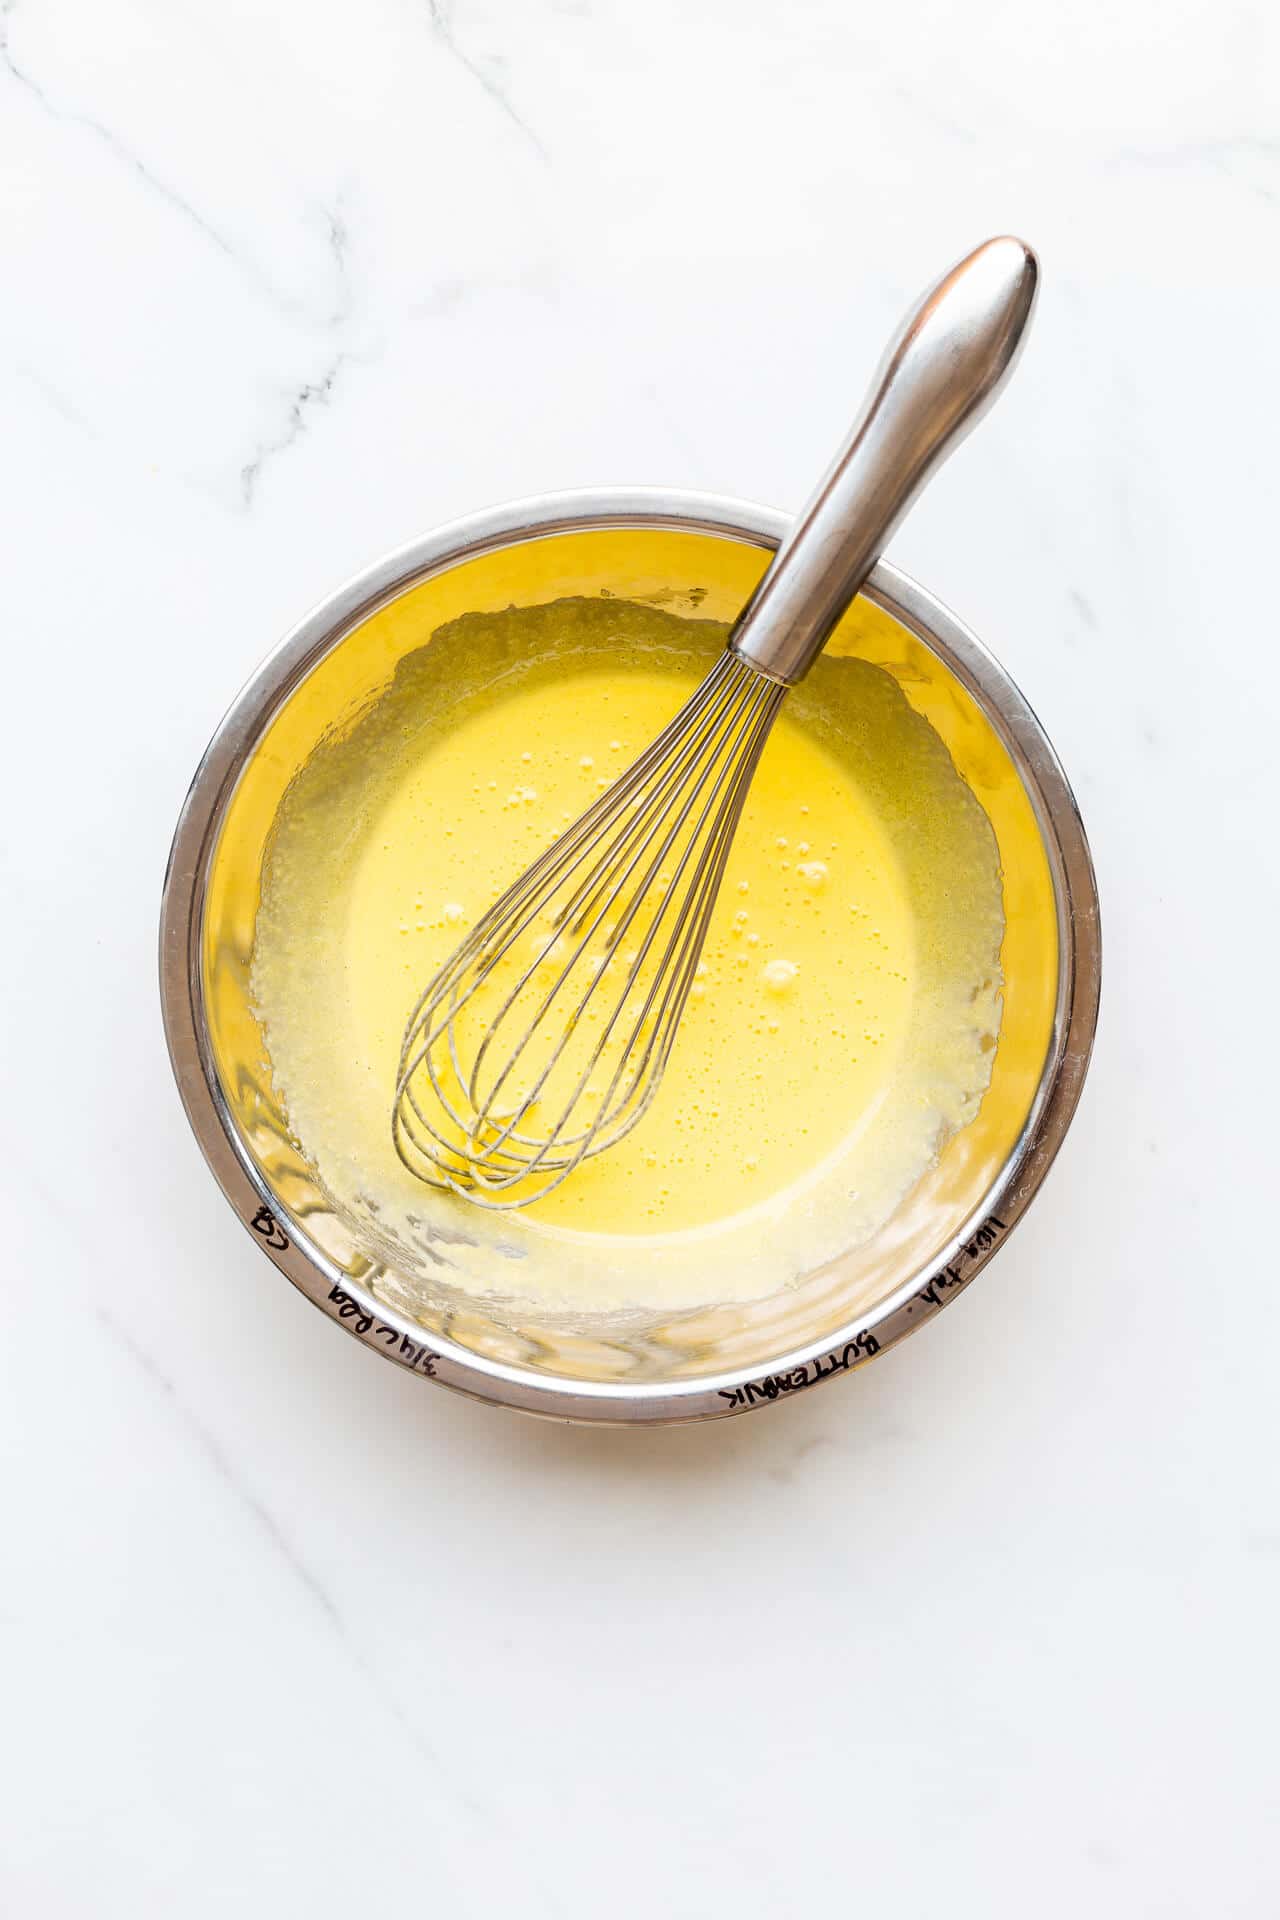 Egg yolks whisked with sugar until they lighten in colour so that they are a creamy light yellow in stainless steel bowl